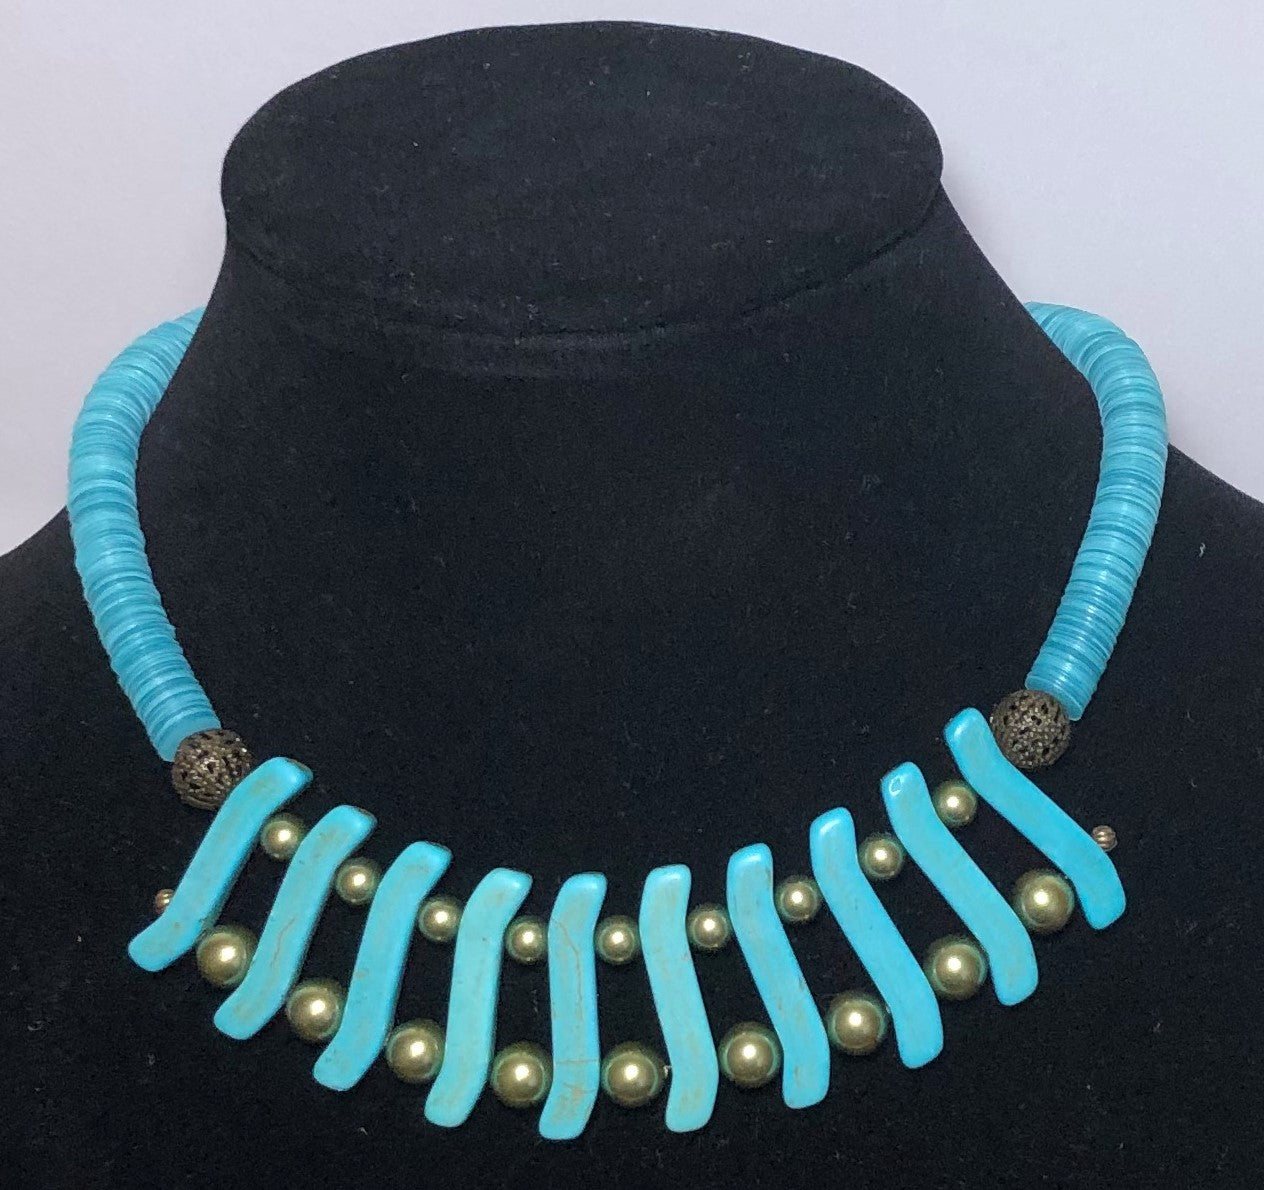 Waves of Turquoise Necklace